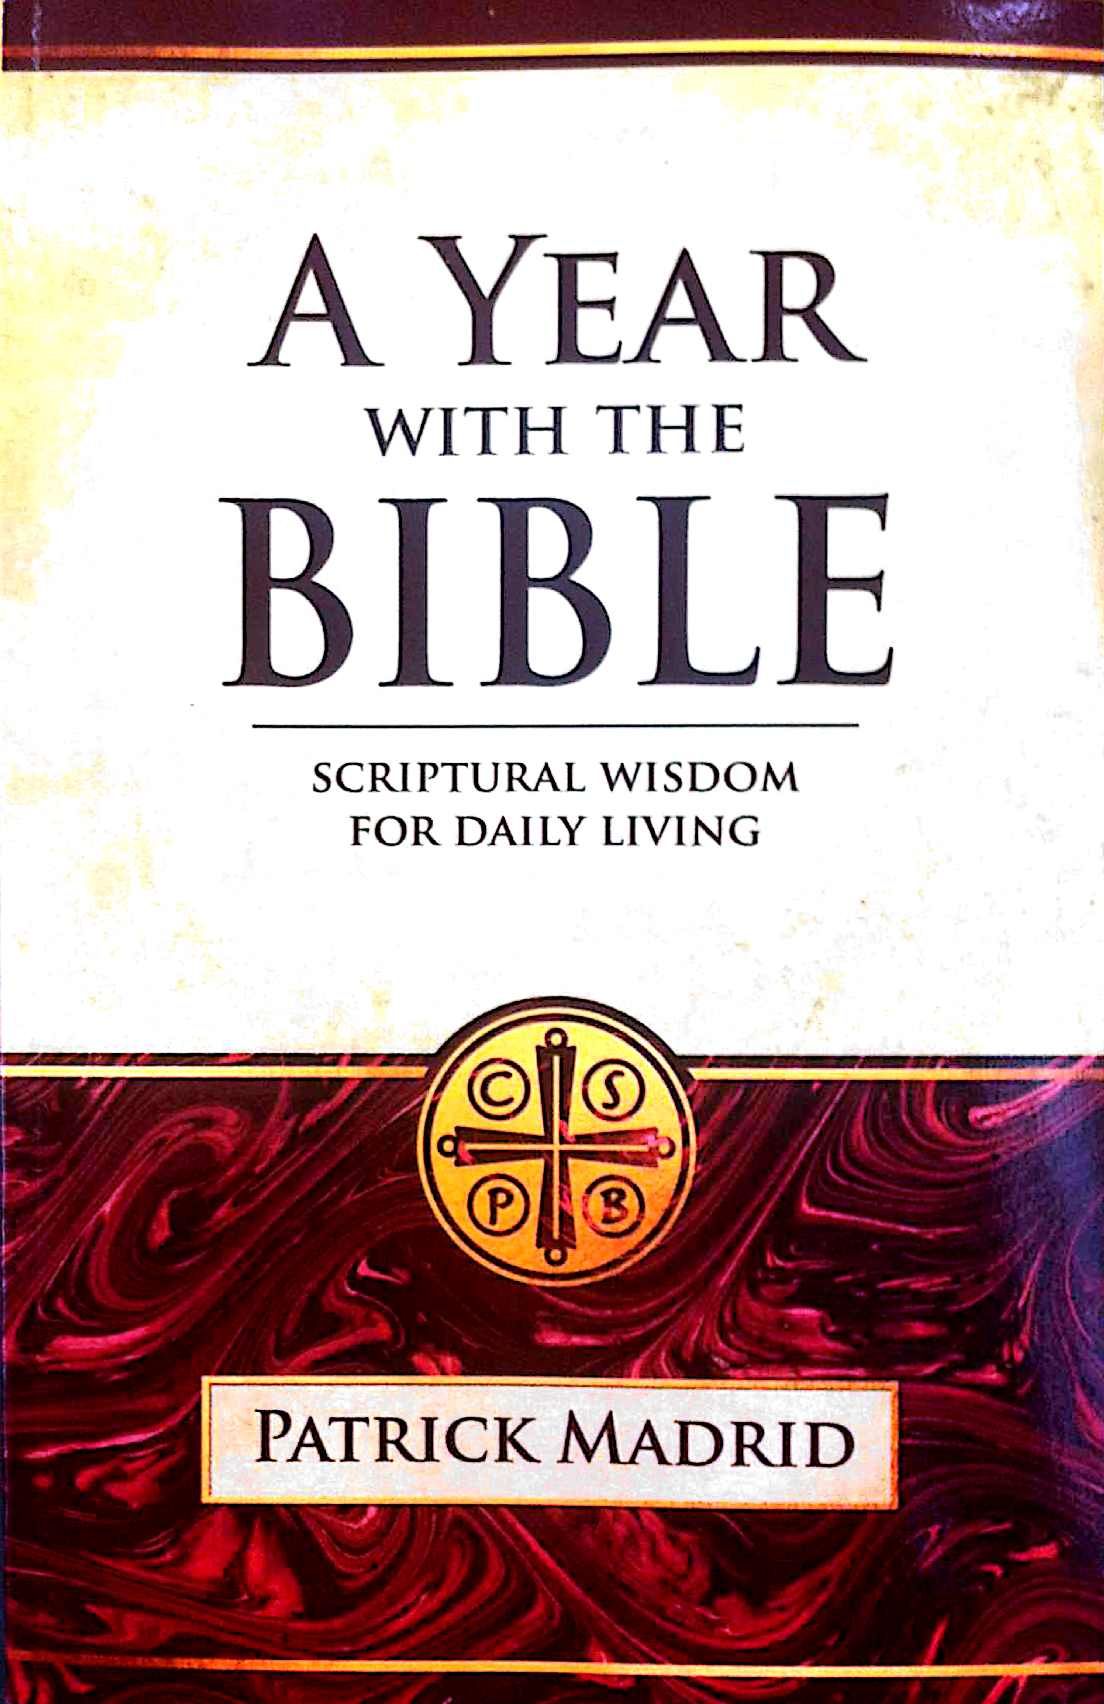 A Year with the Bible: Scriptural Wisdom for Daily Living / Patrick Madrid